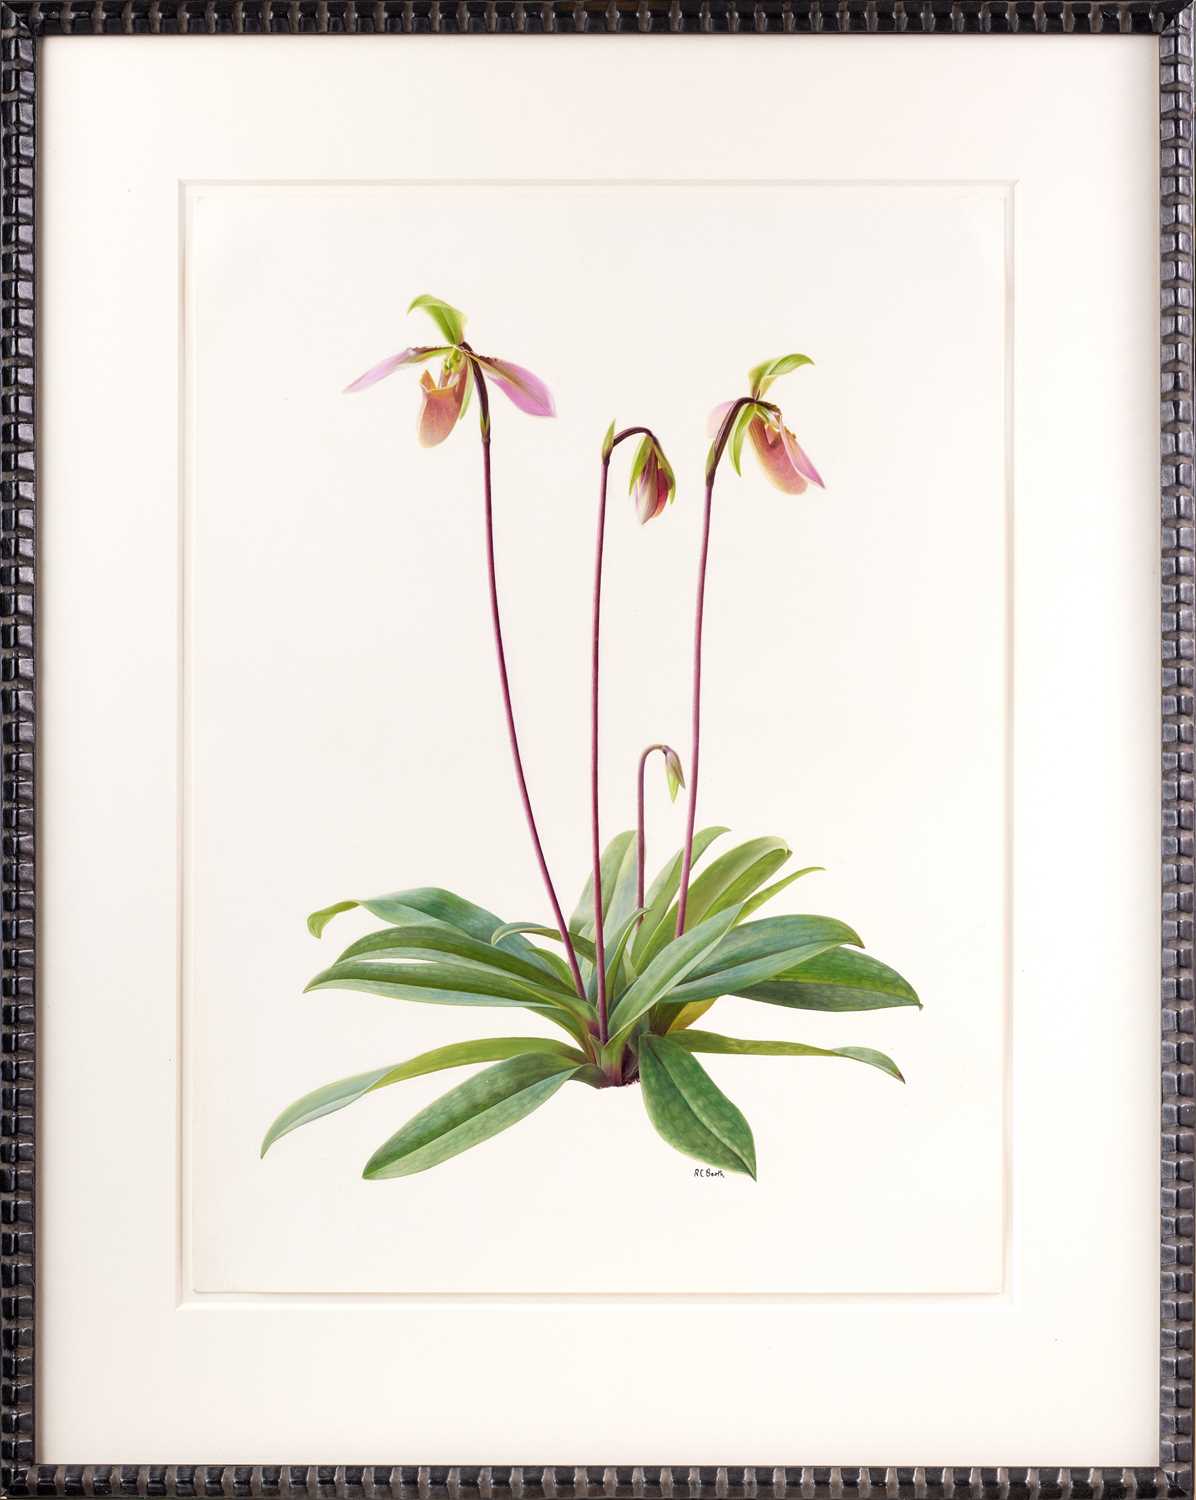 Raymond Booth (1929-2015) “Paphiopedilum Appletonianum” Signed, oil on paper, 47.5cm by 35cm - Image 2 of 17